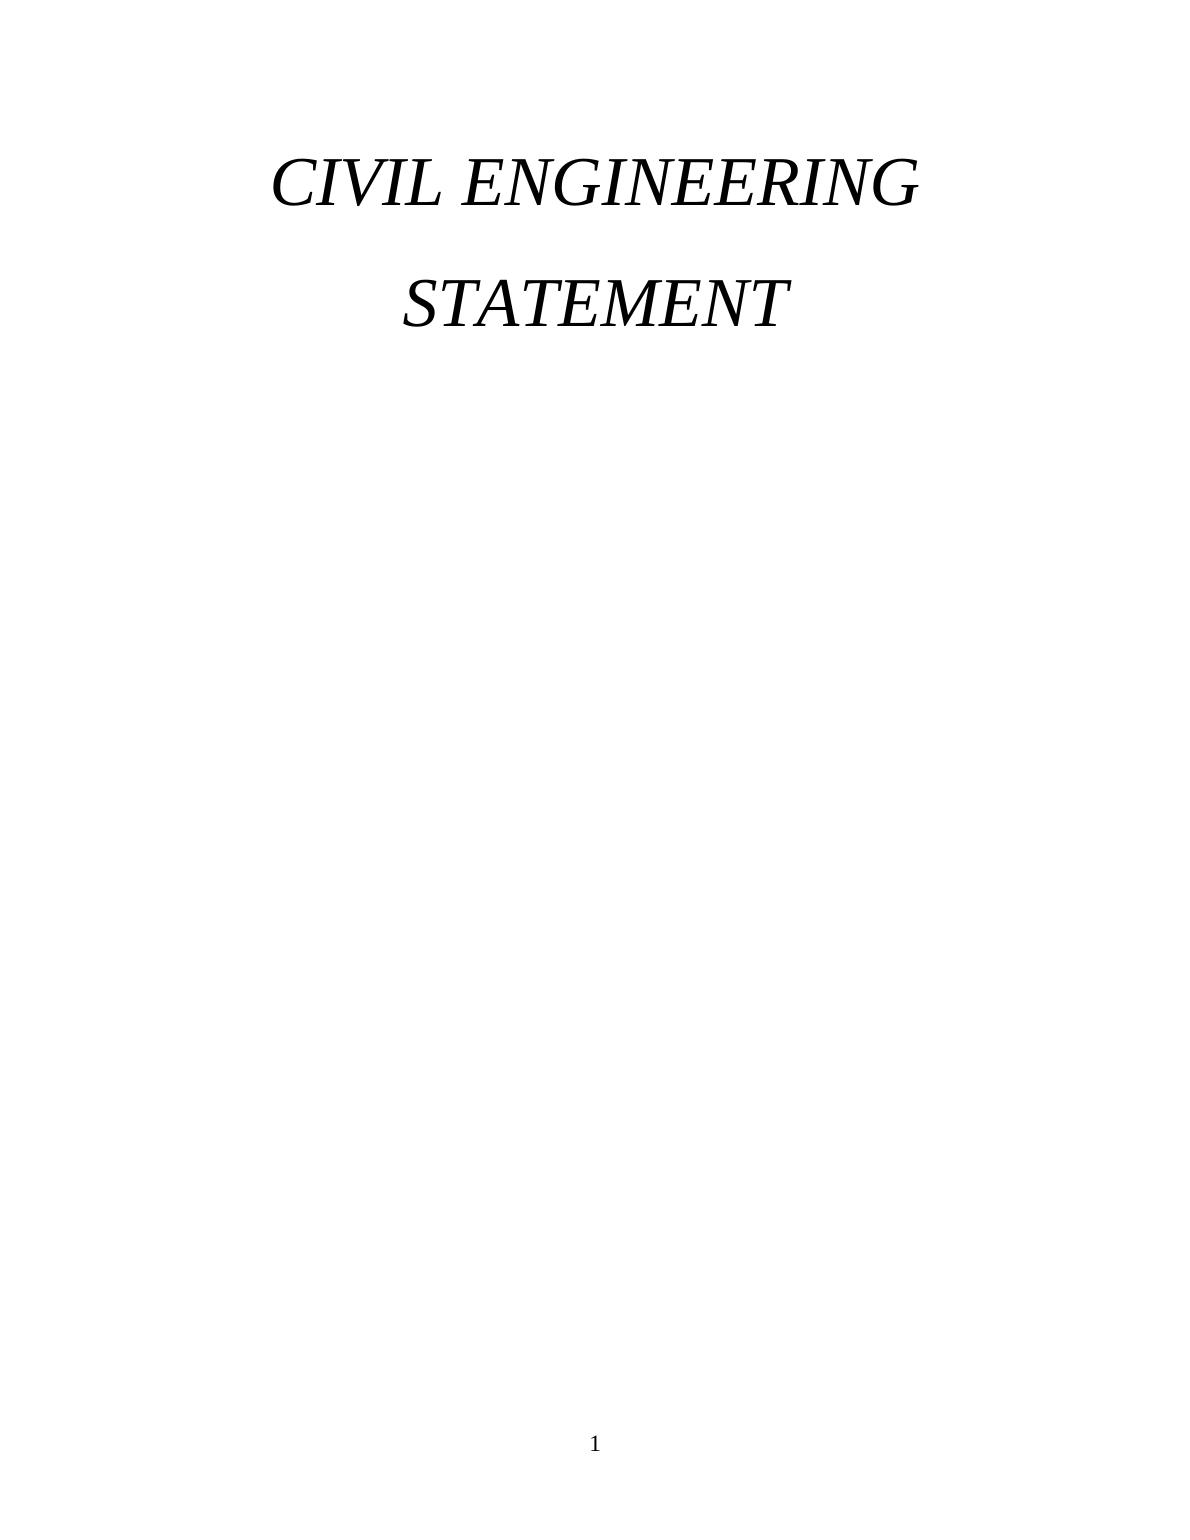 personal statement for civil engineering course